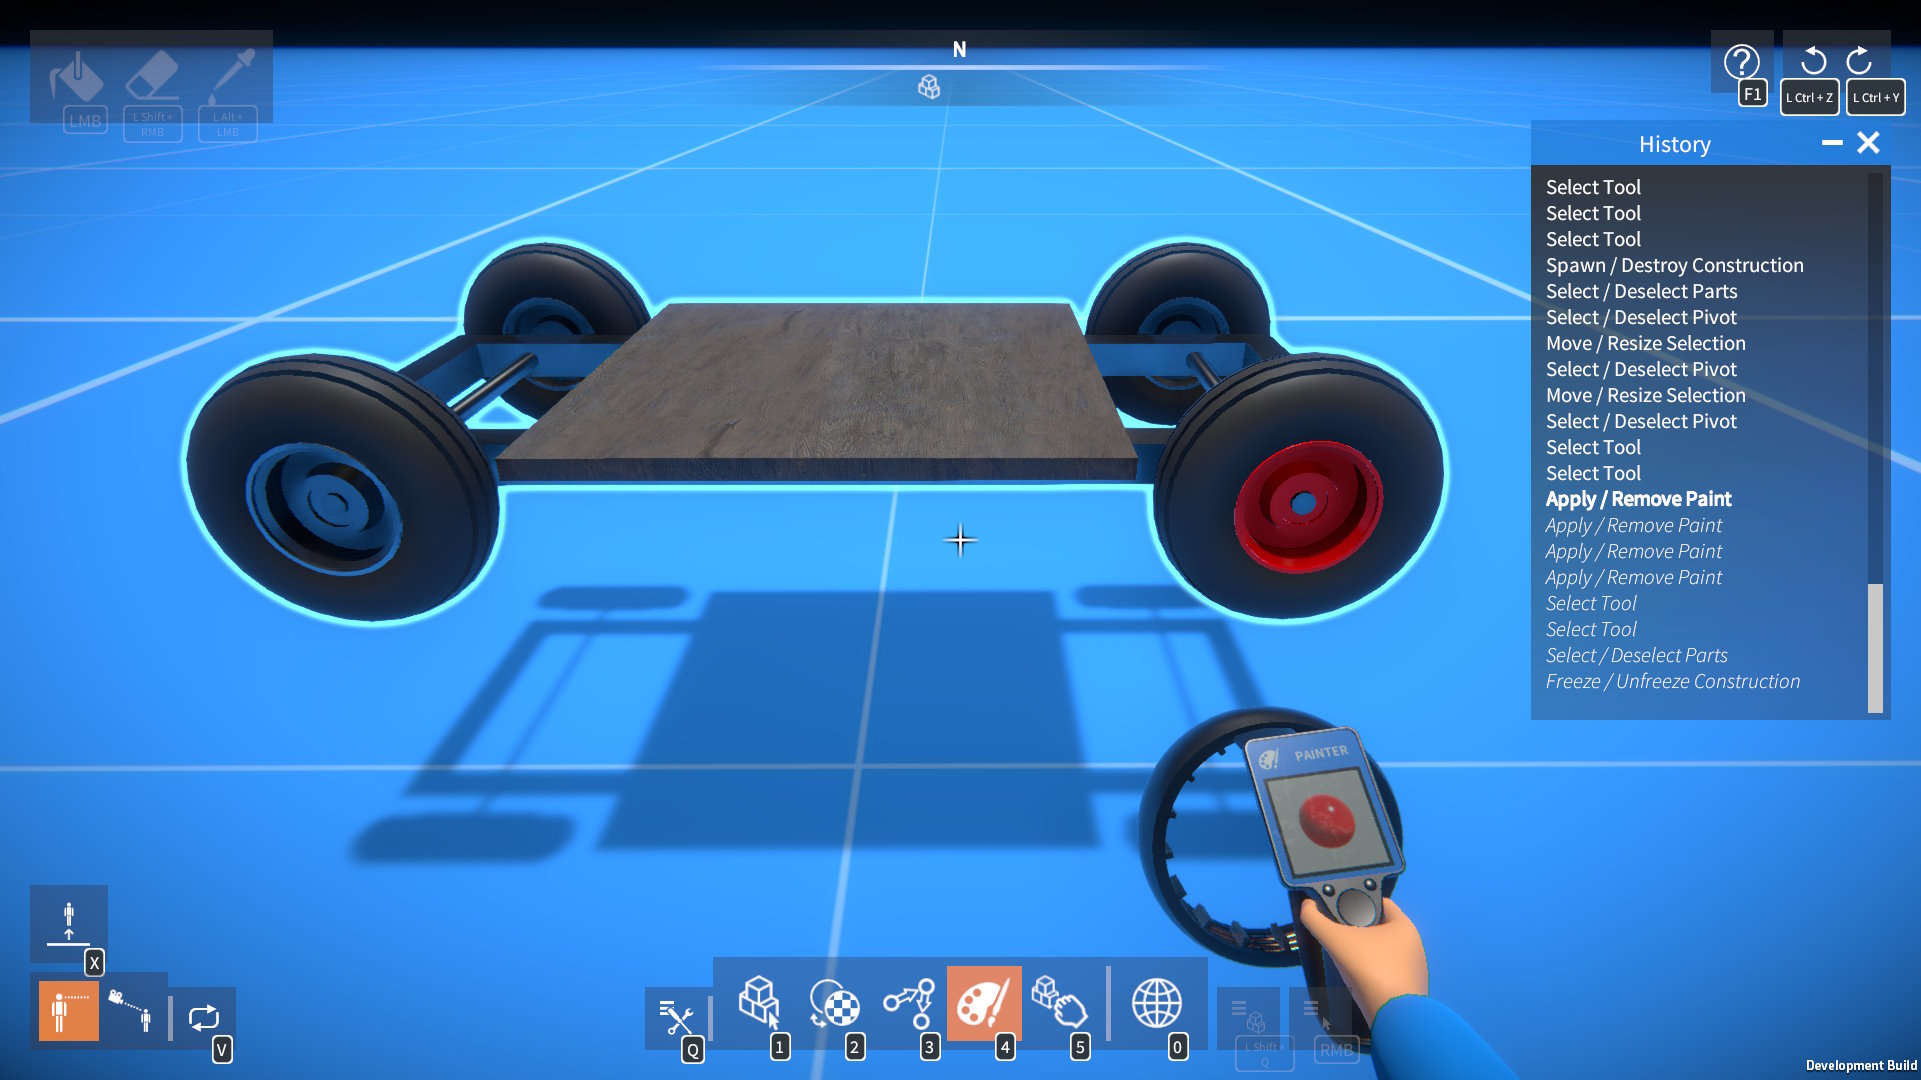 Games - [WIP] GearBlocks - Build working physics based machines and  mechanisms [DEMO] - Unity Forum